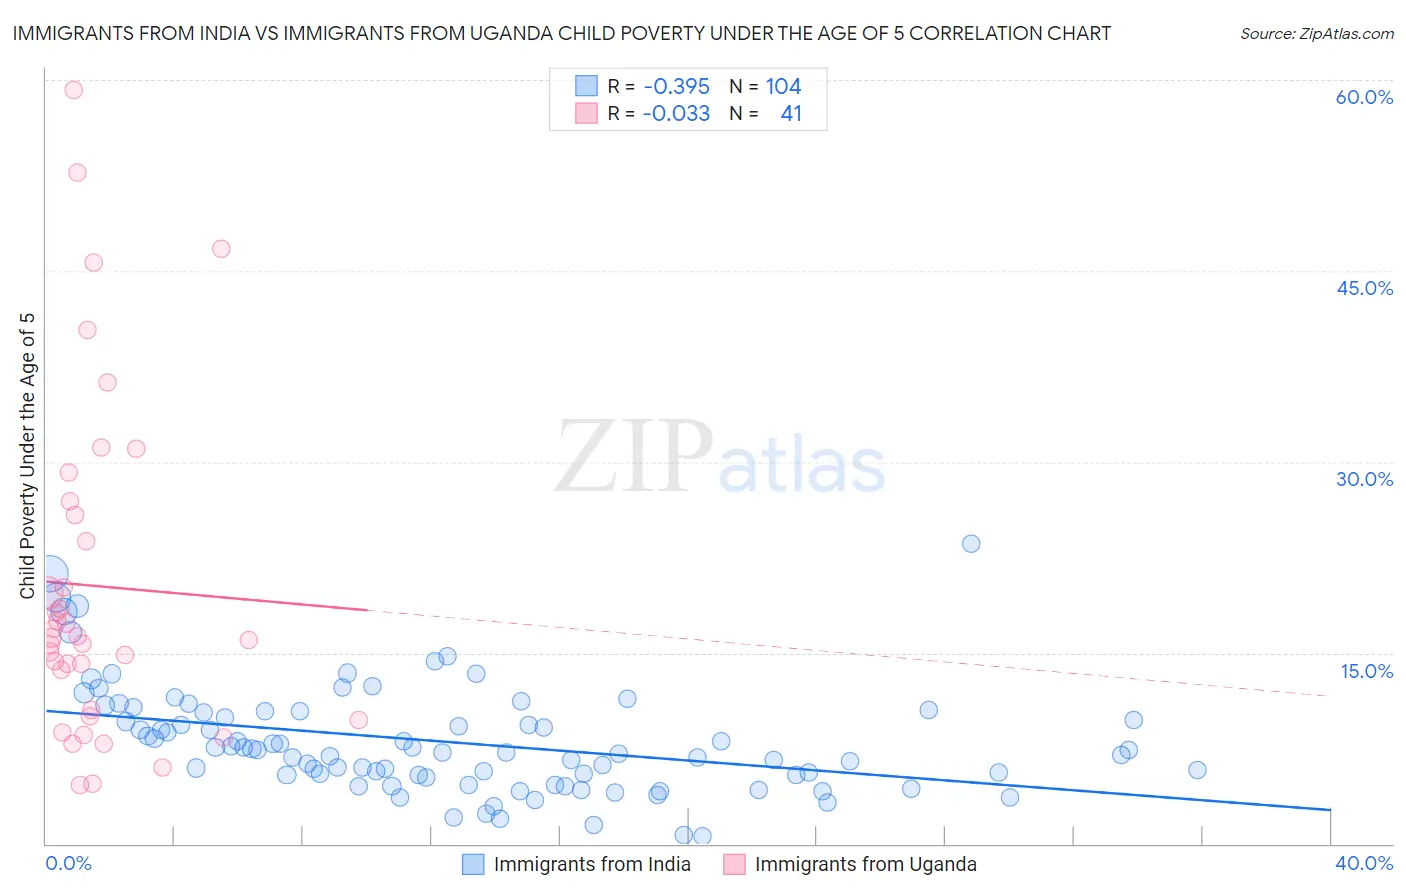 Immigrants from India vs Immigrants from Uganda Child Poverty Under the Age of 5